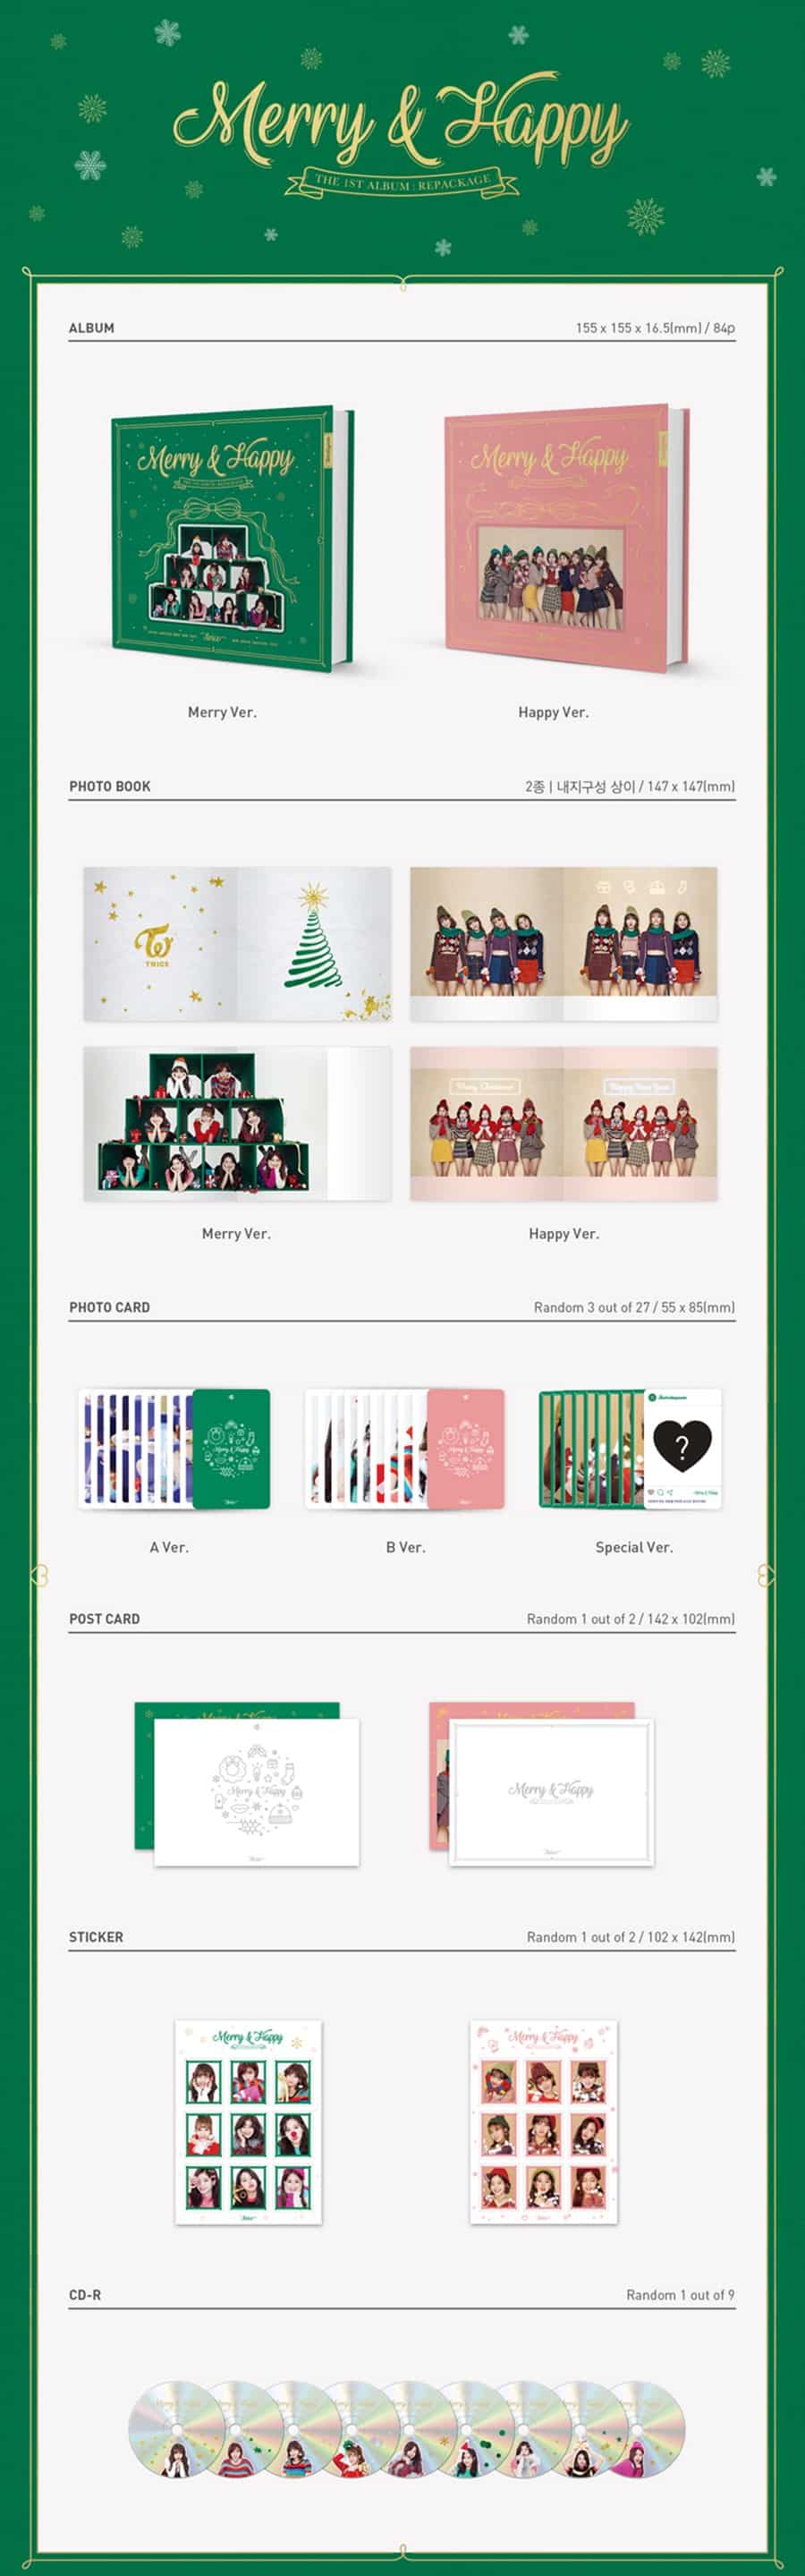 twice-1st-album-repackage-merry-and-happy-wholesales